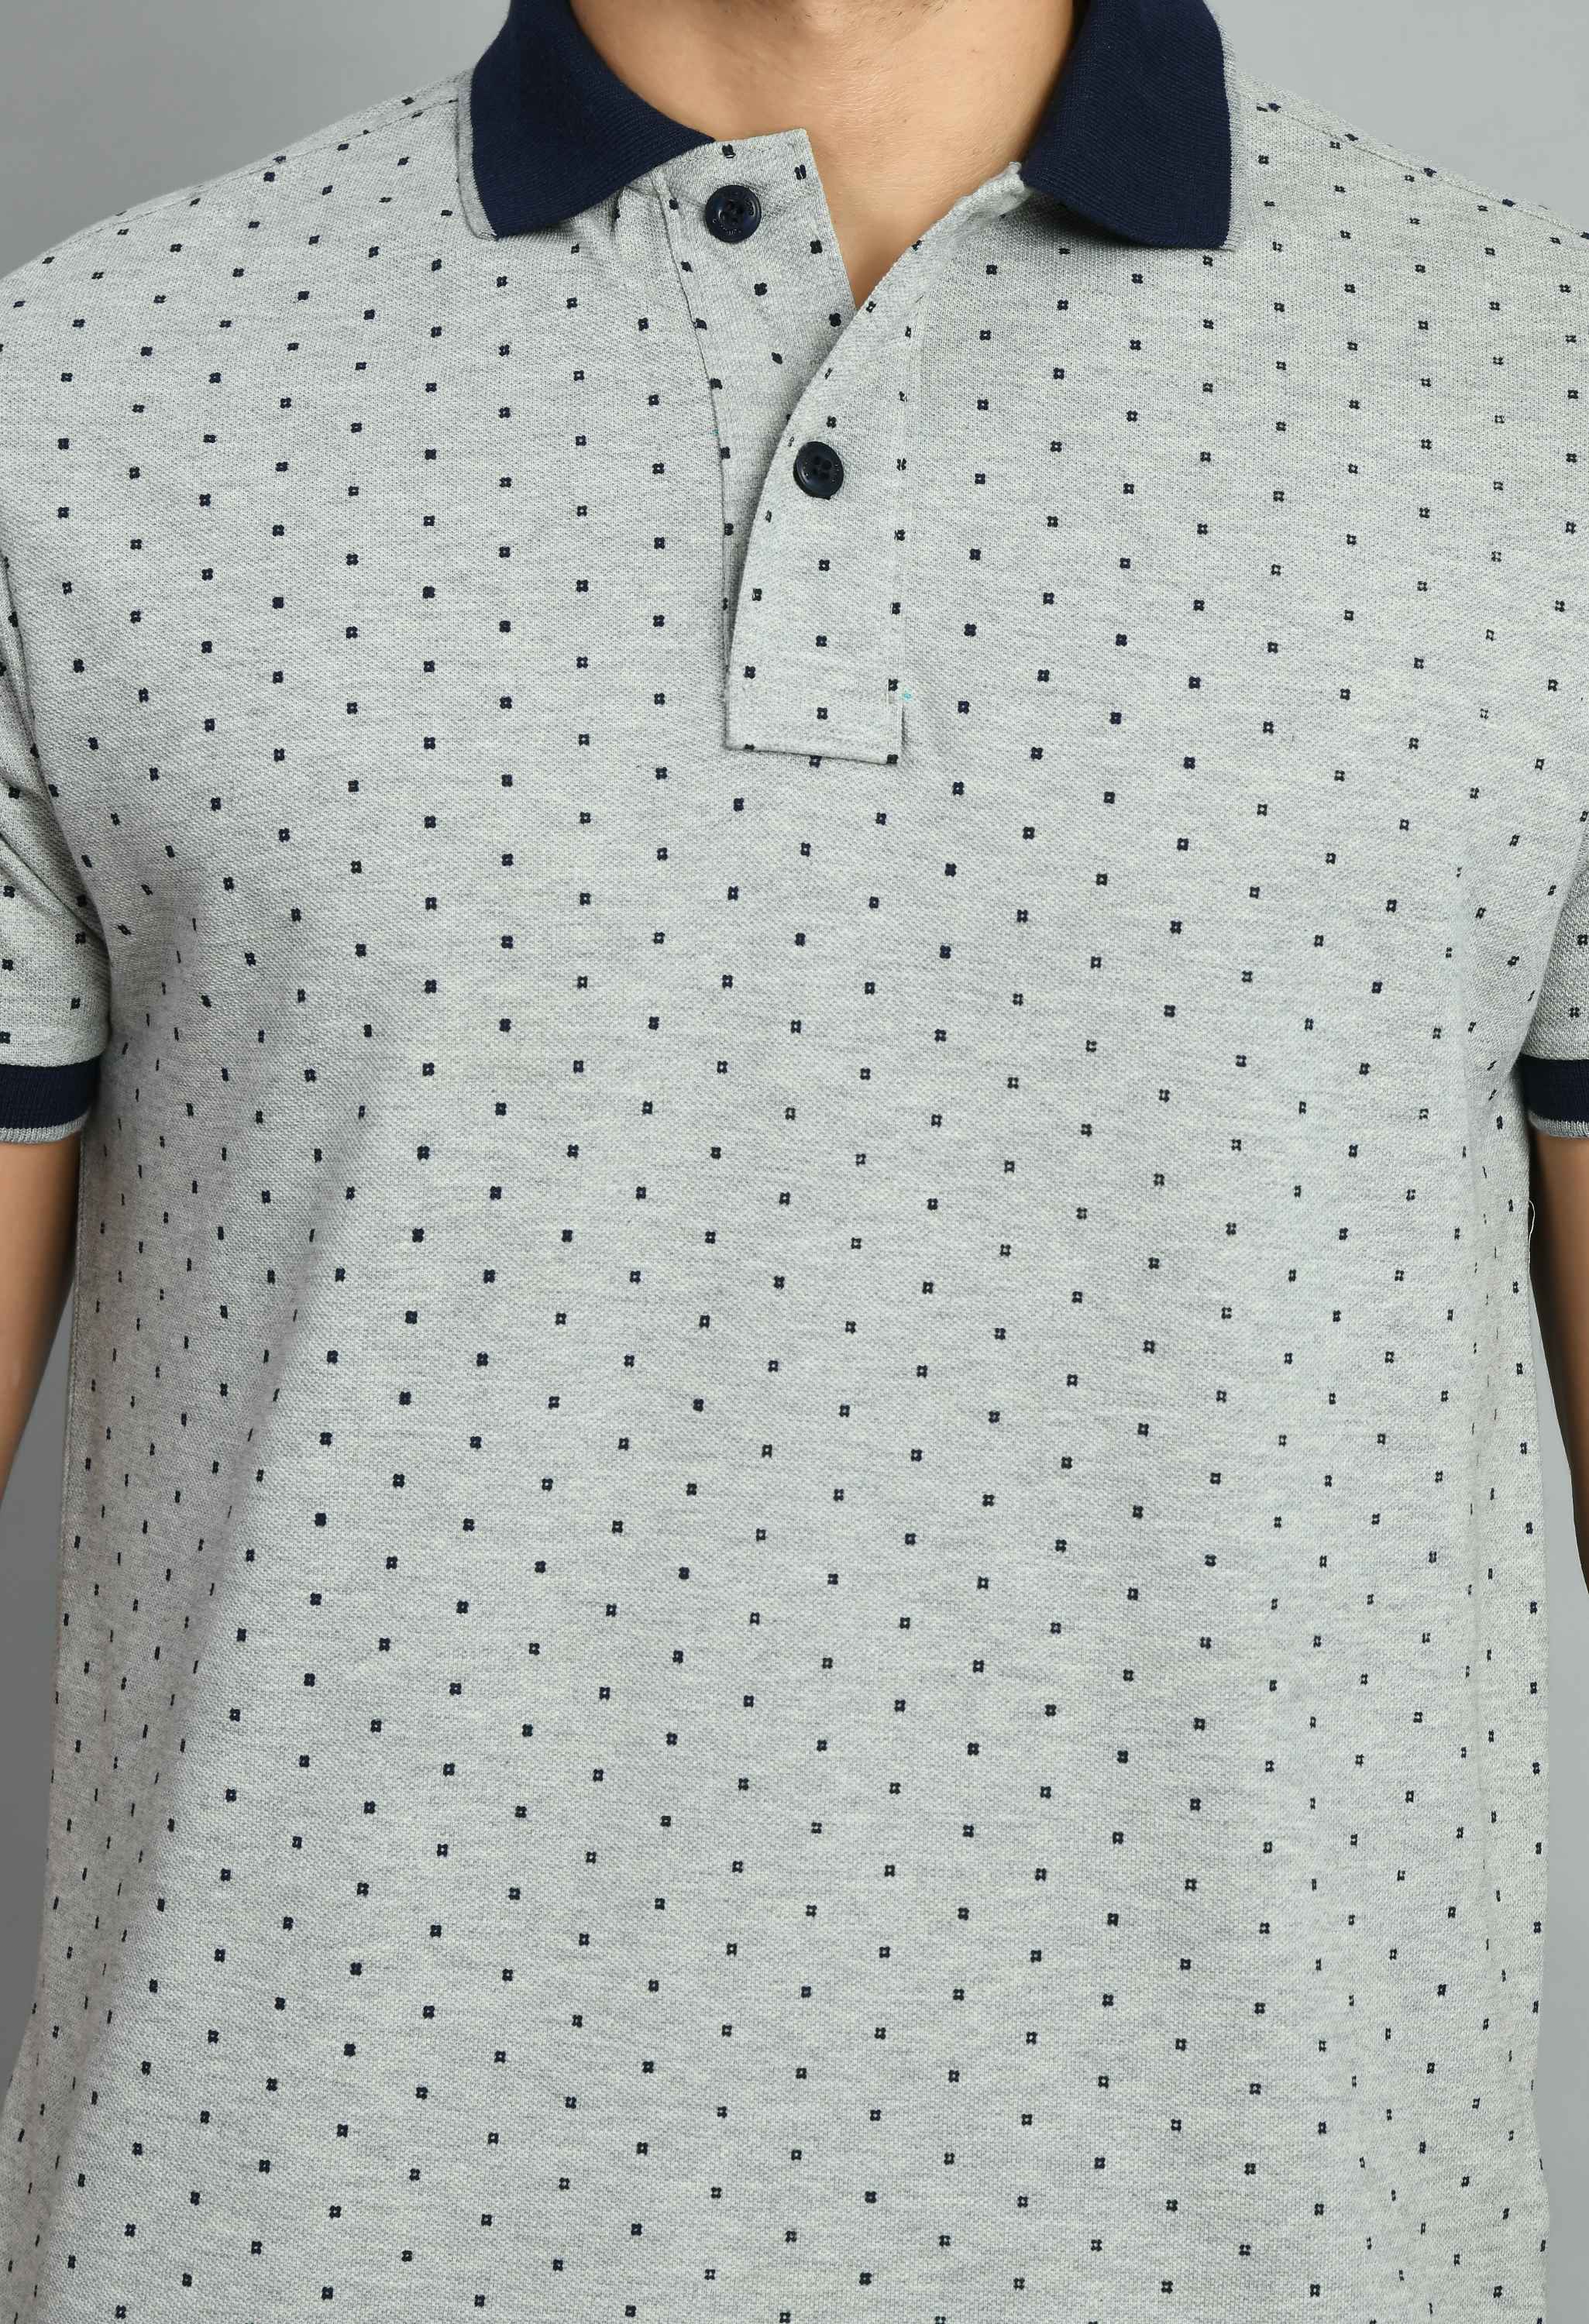 Men's Printed Gray Smart Fit Polo Tees